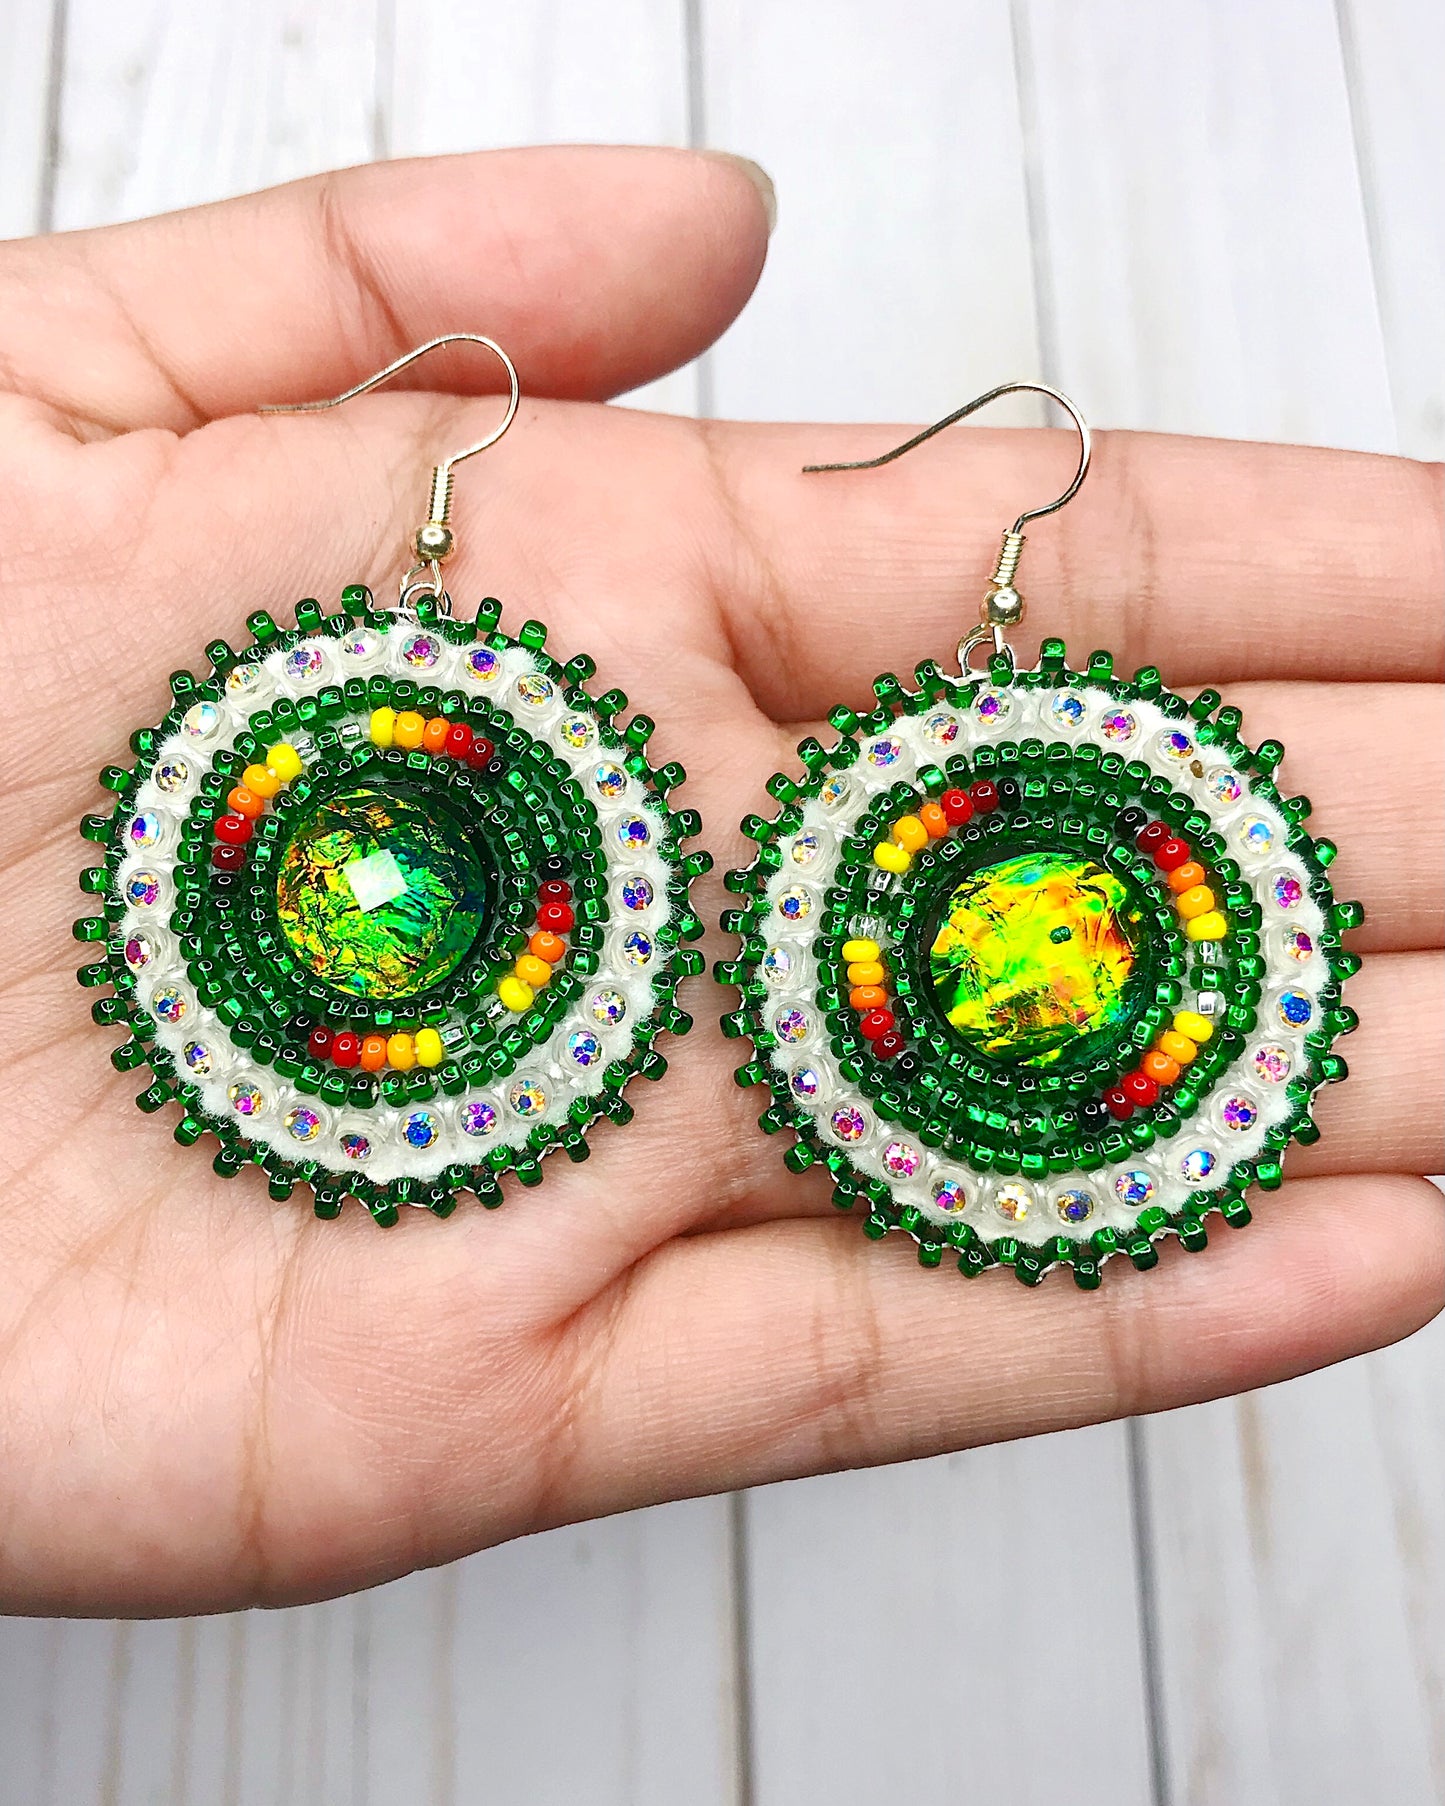 Green Fire Color Round Earrings